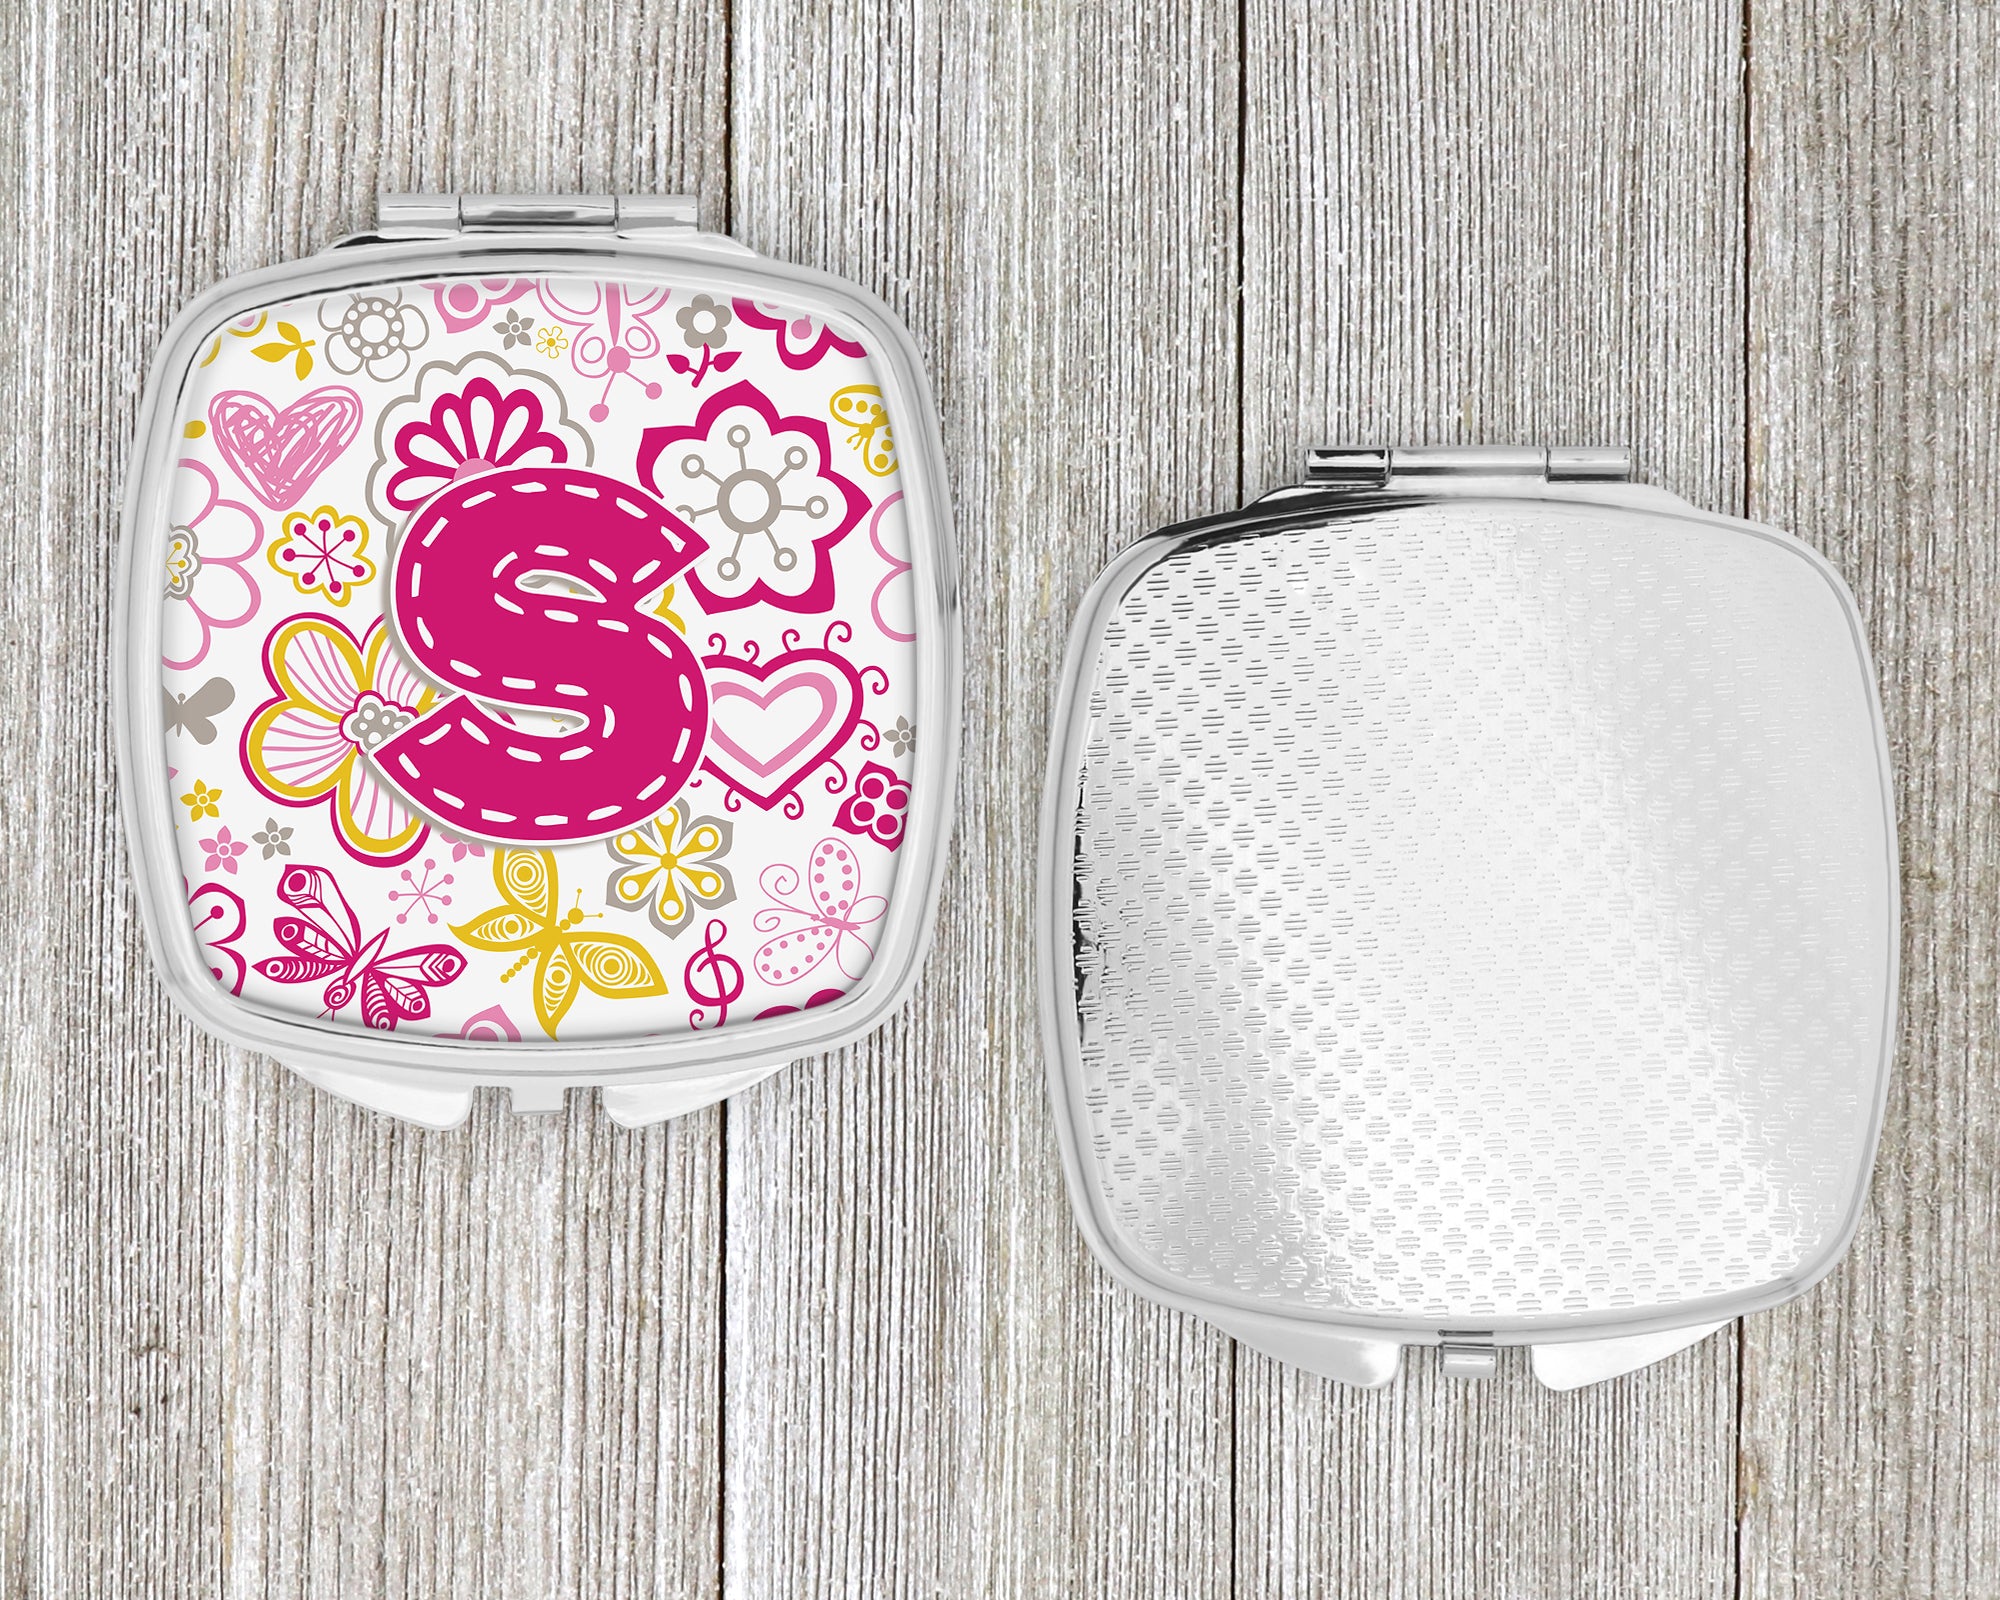 Letter S Flowers and Butterflies Pink Compact Mirror CJ2005-SSCM  the-store.com.